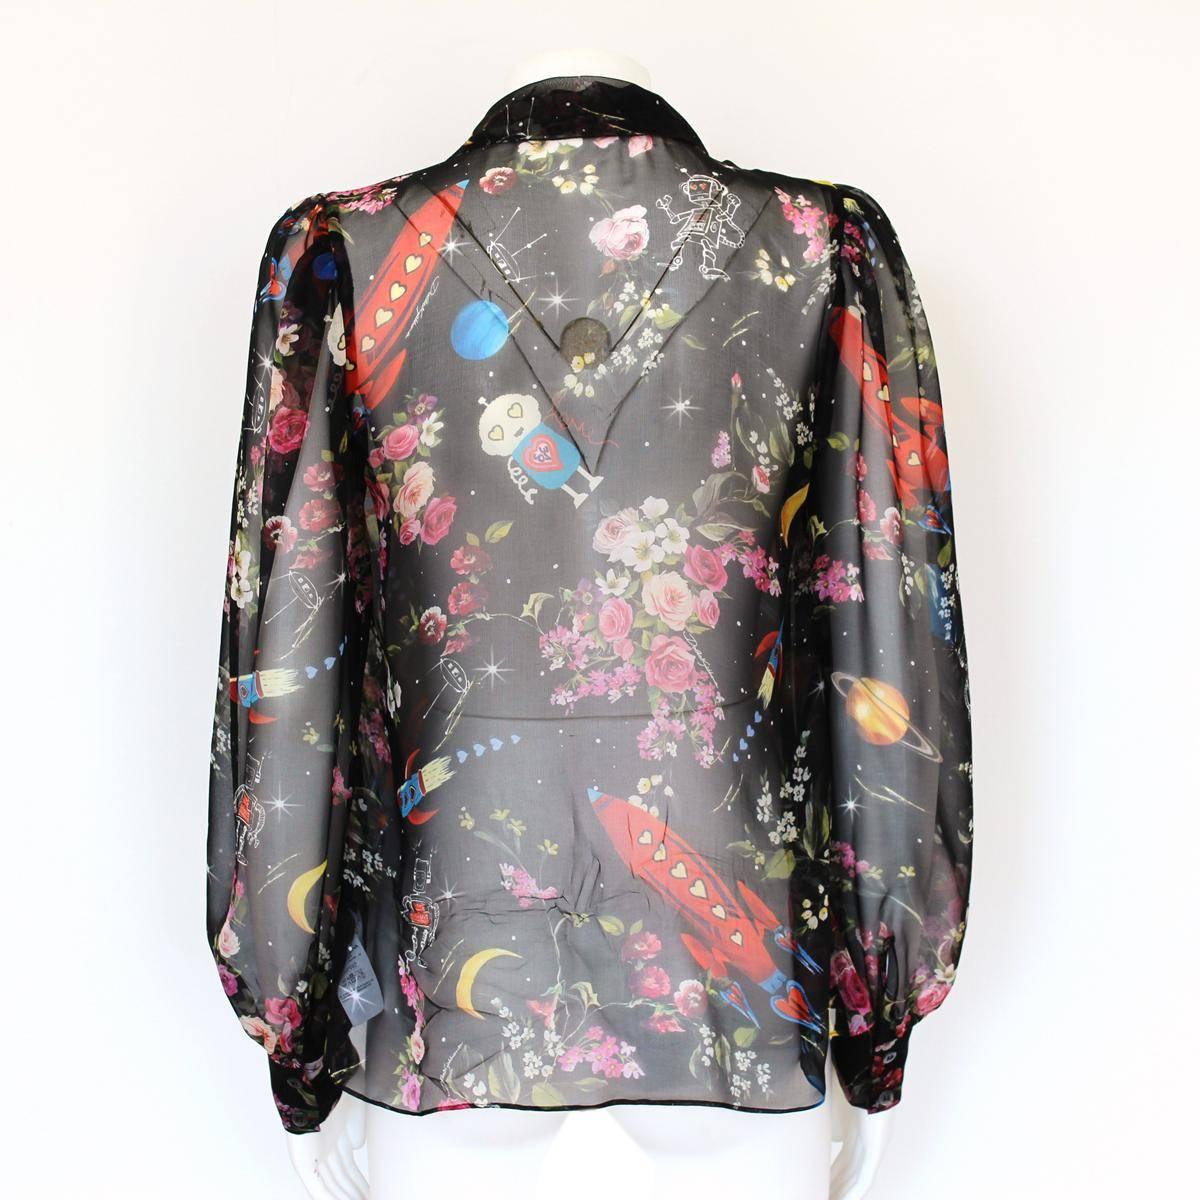 Beautiful and very wanted Dolce & Gabbana shirt
Silk
Black color
Multicolored fancy pattern, floral & stellar falres
Central buttons
Lenght from shoulder cm 57 (22.4 inches)
Made in Italy
Worldwide express shipping included in the price !